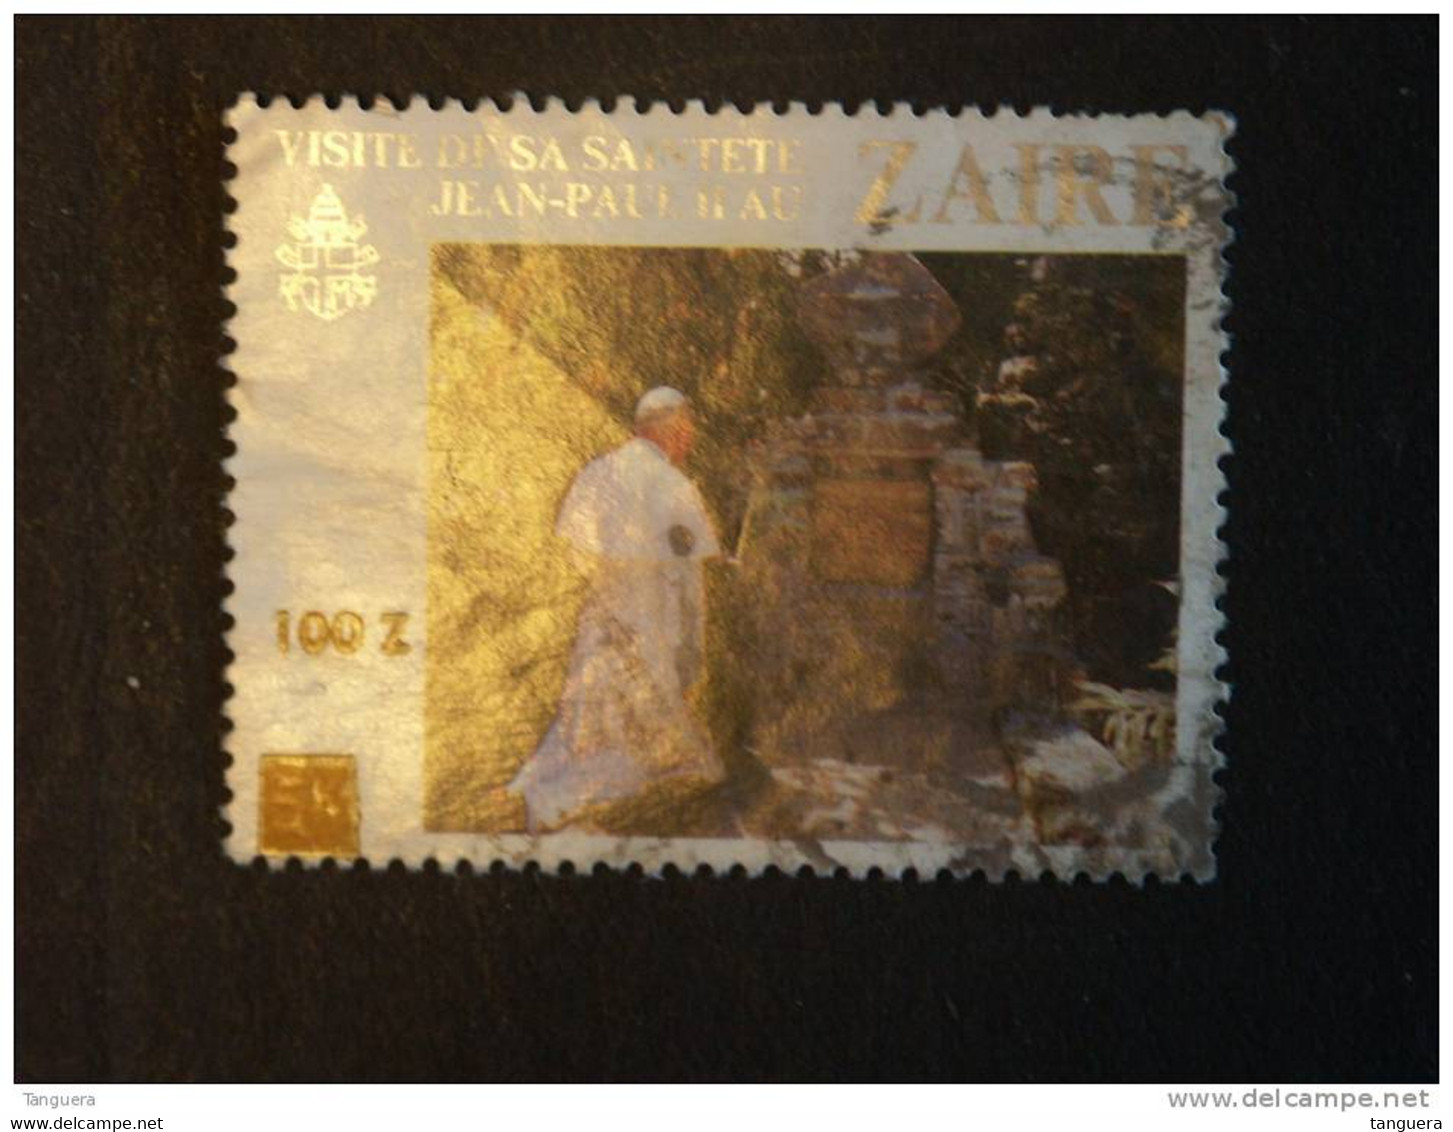 Congo Zaire 1990 Timbres Surchargés Pape Jean-Paul II Yv 1282 COB 1362 O - Used Stamps